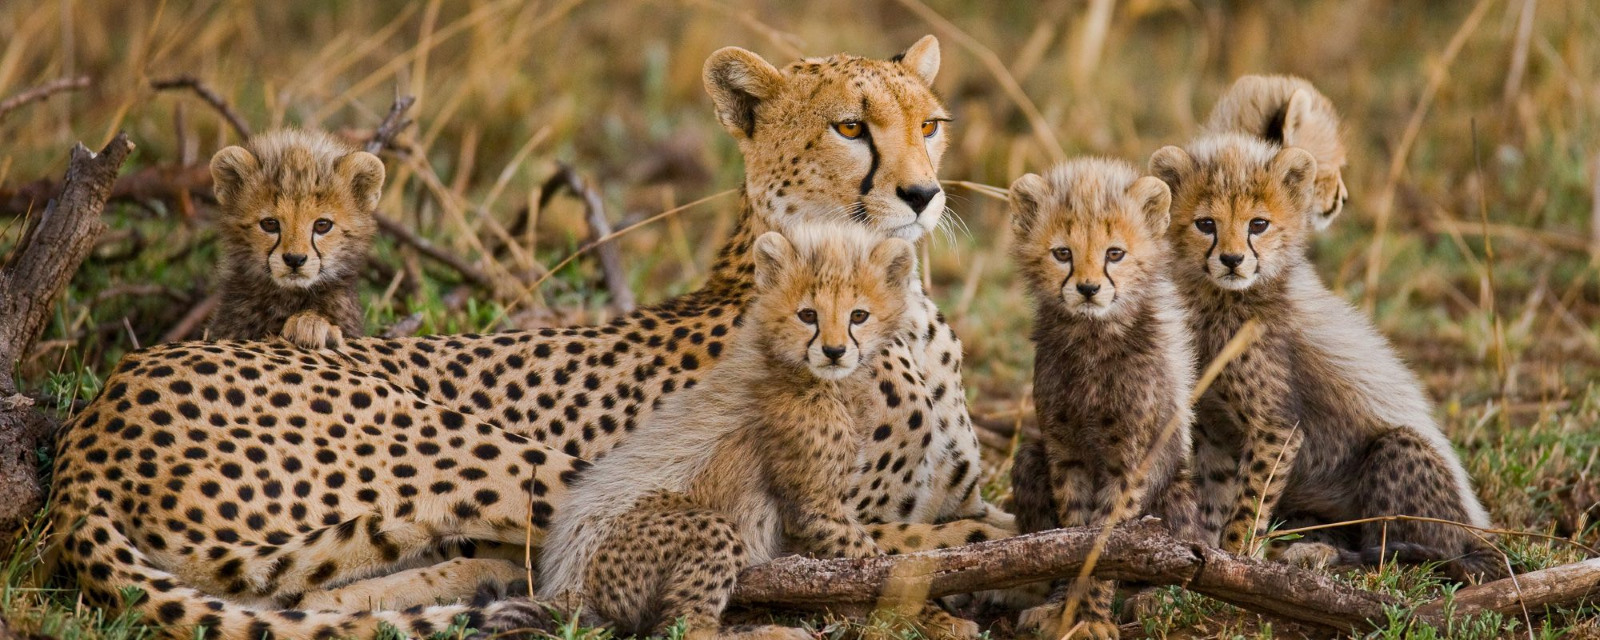 Cheetah with Cubs